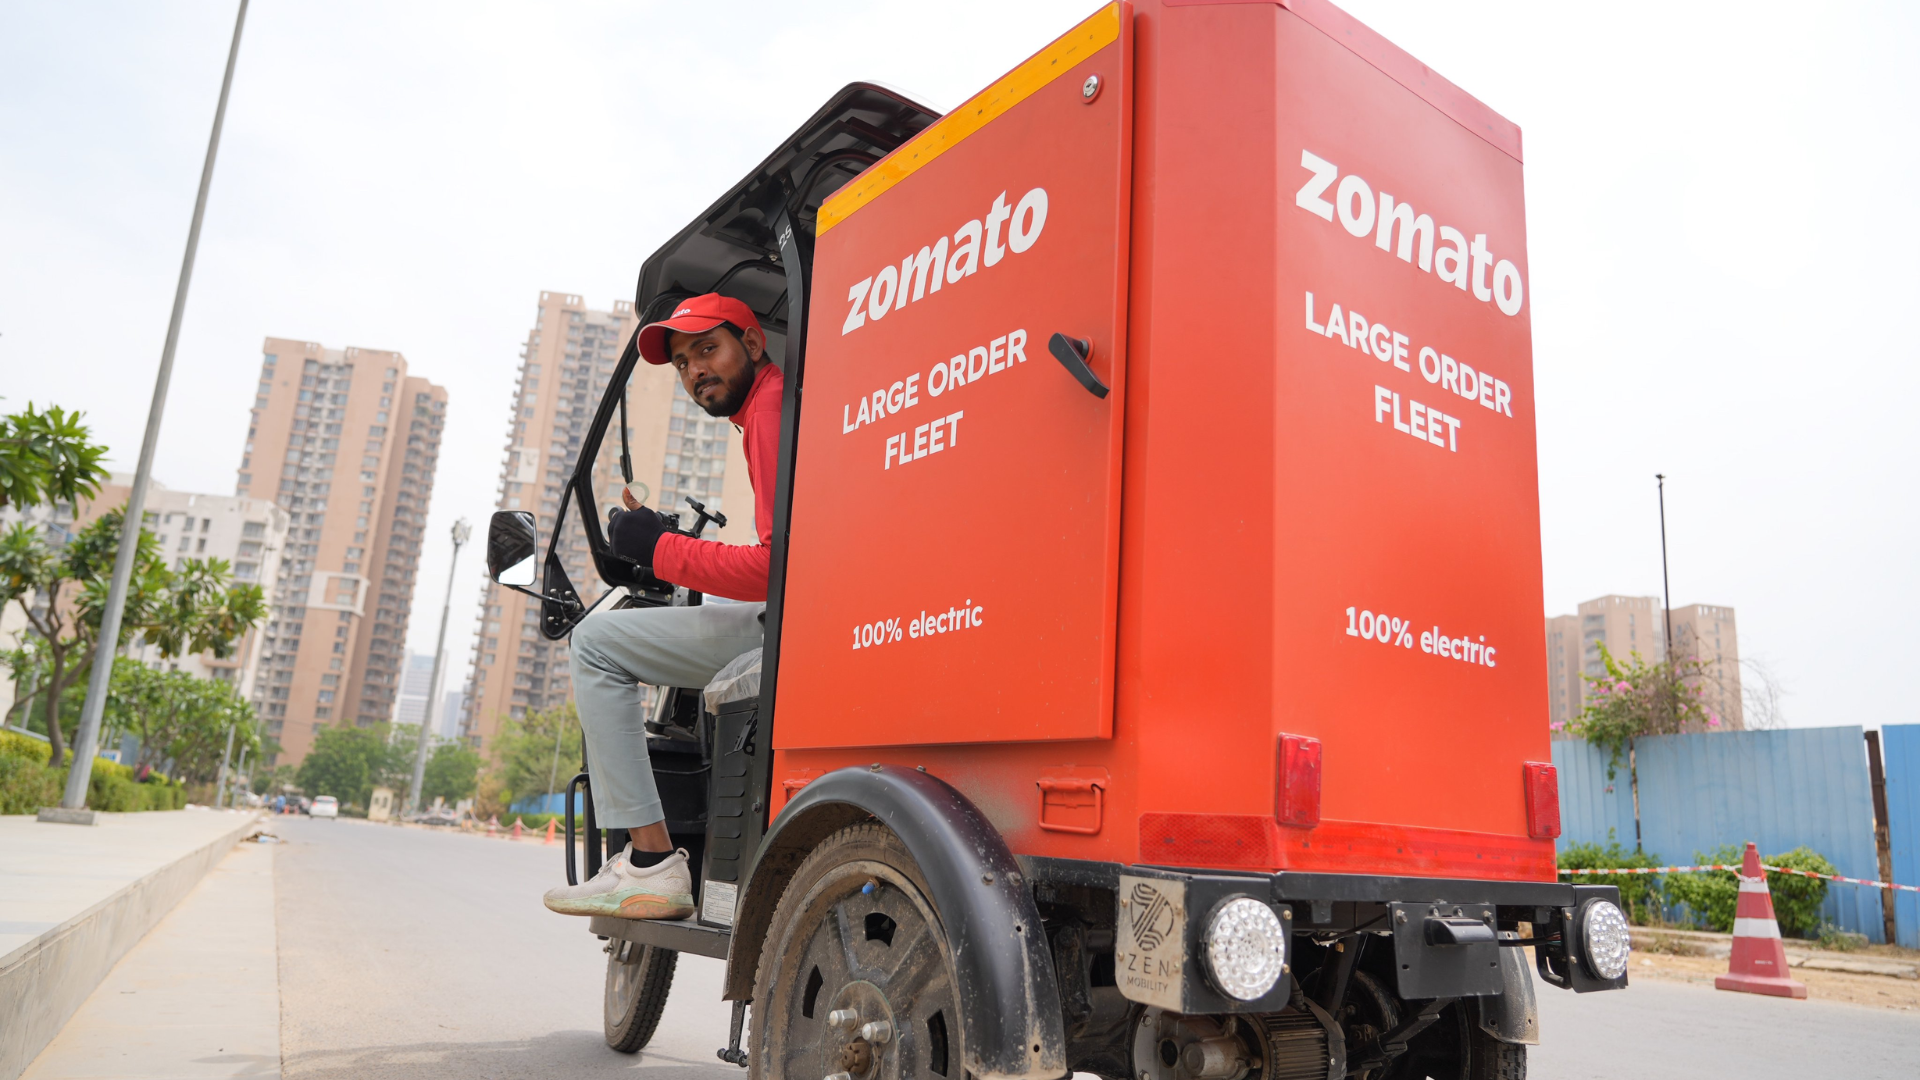 Zomato Launches India’s First Large Order Fleet To Ease Bulk Delivery